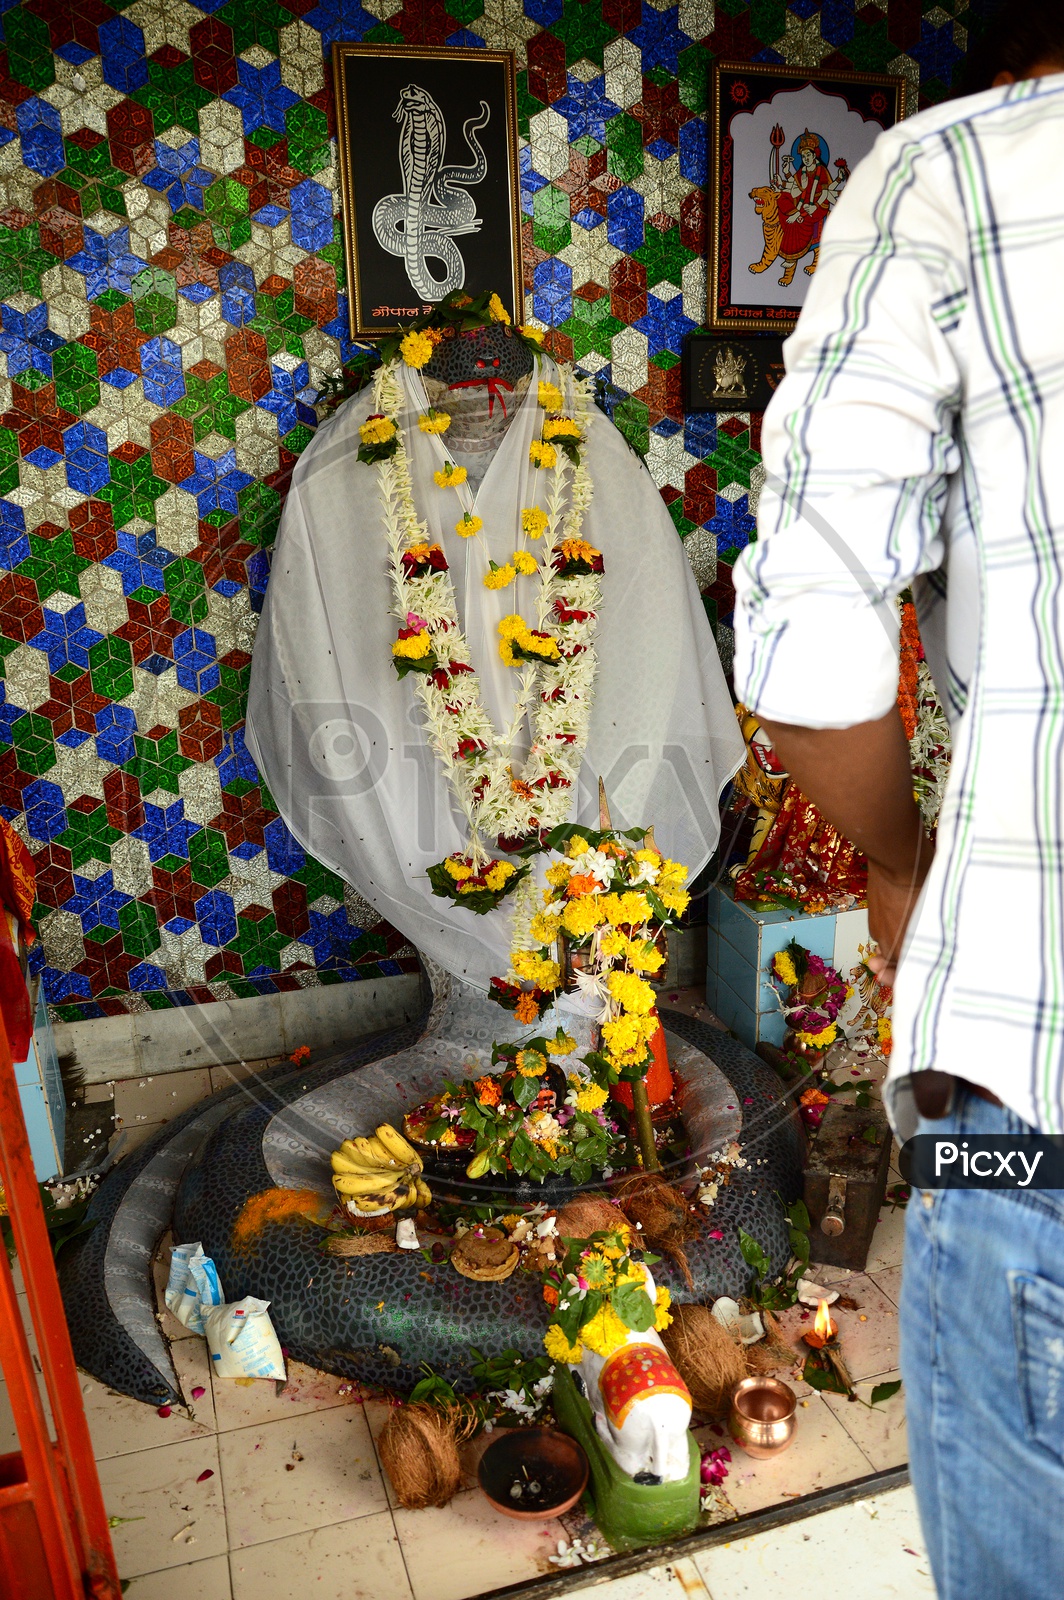 Devotees offering prayers in a temple